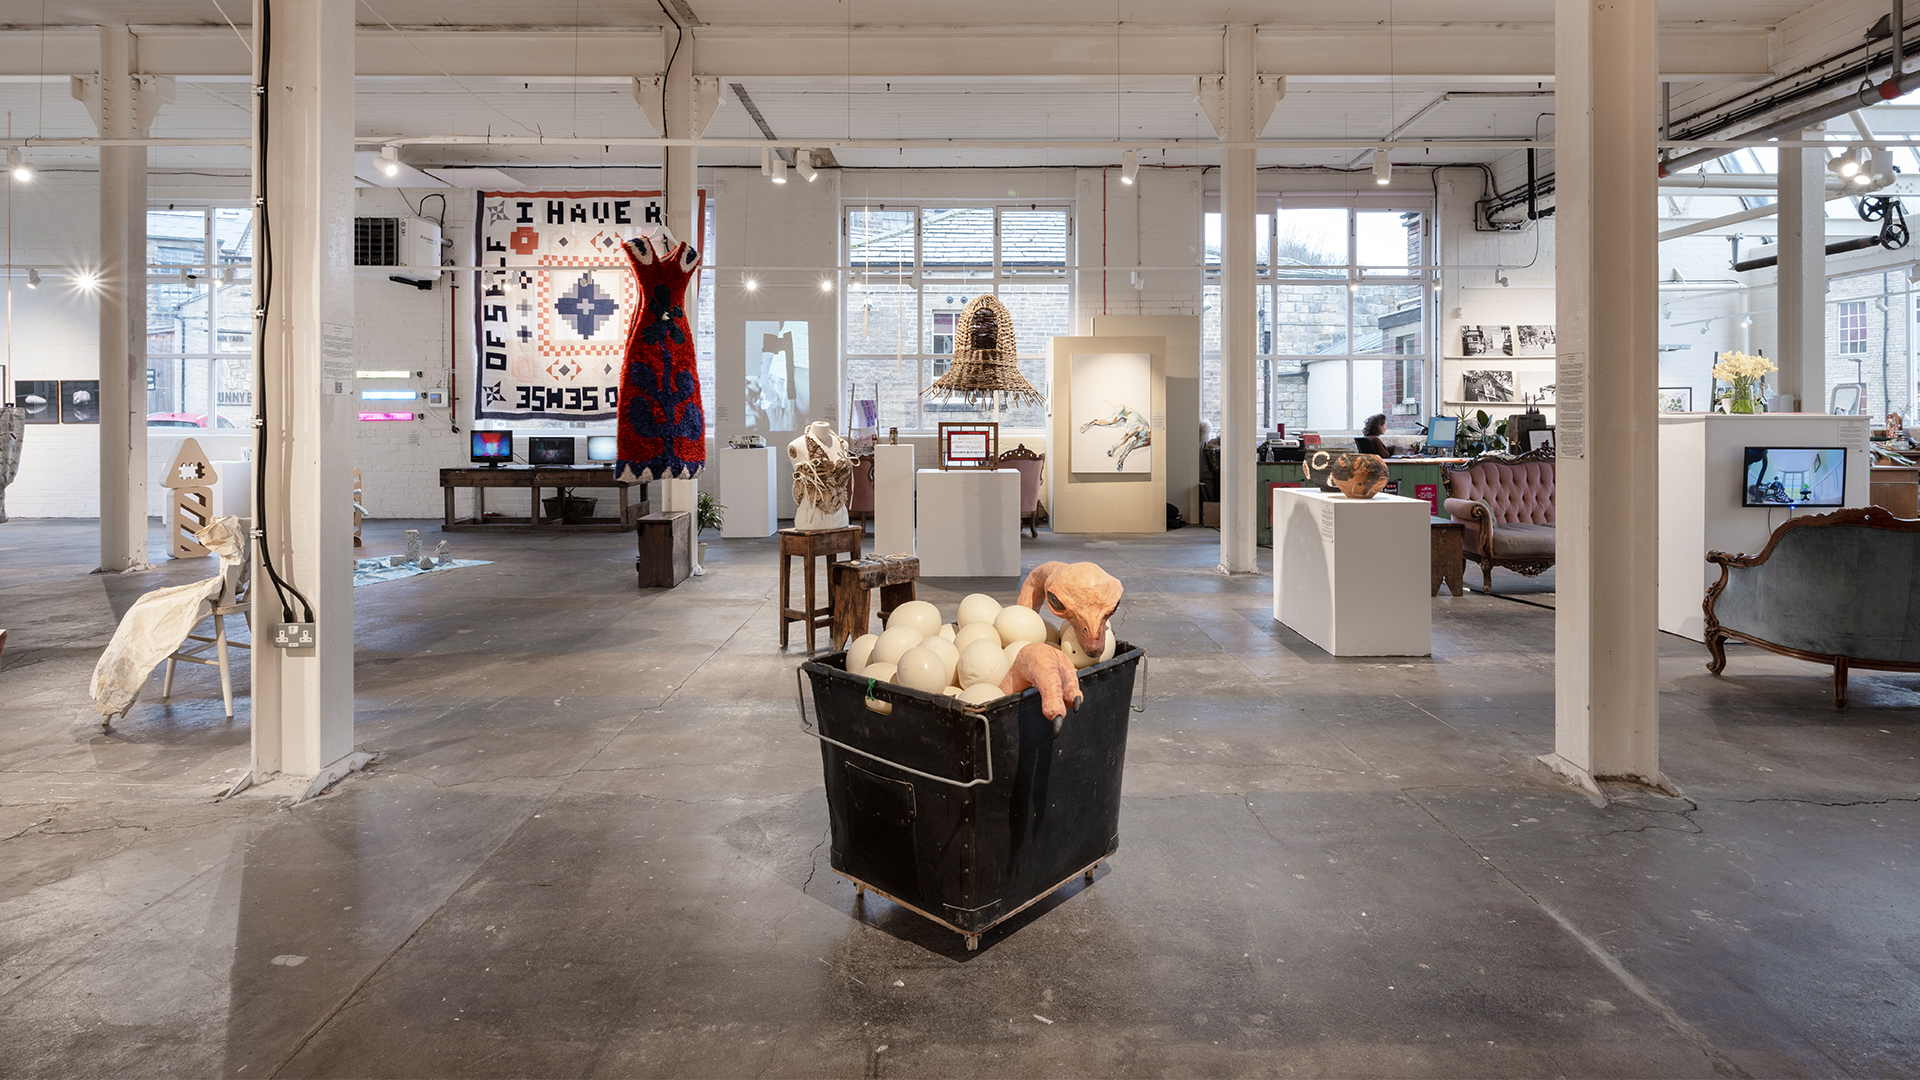 Wide-angle view of the Gallery, with a sculpture of an ostrich inside a laundry cart full of ostrich eggs positioned on the floor in the foreground.